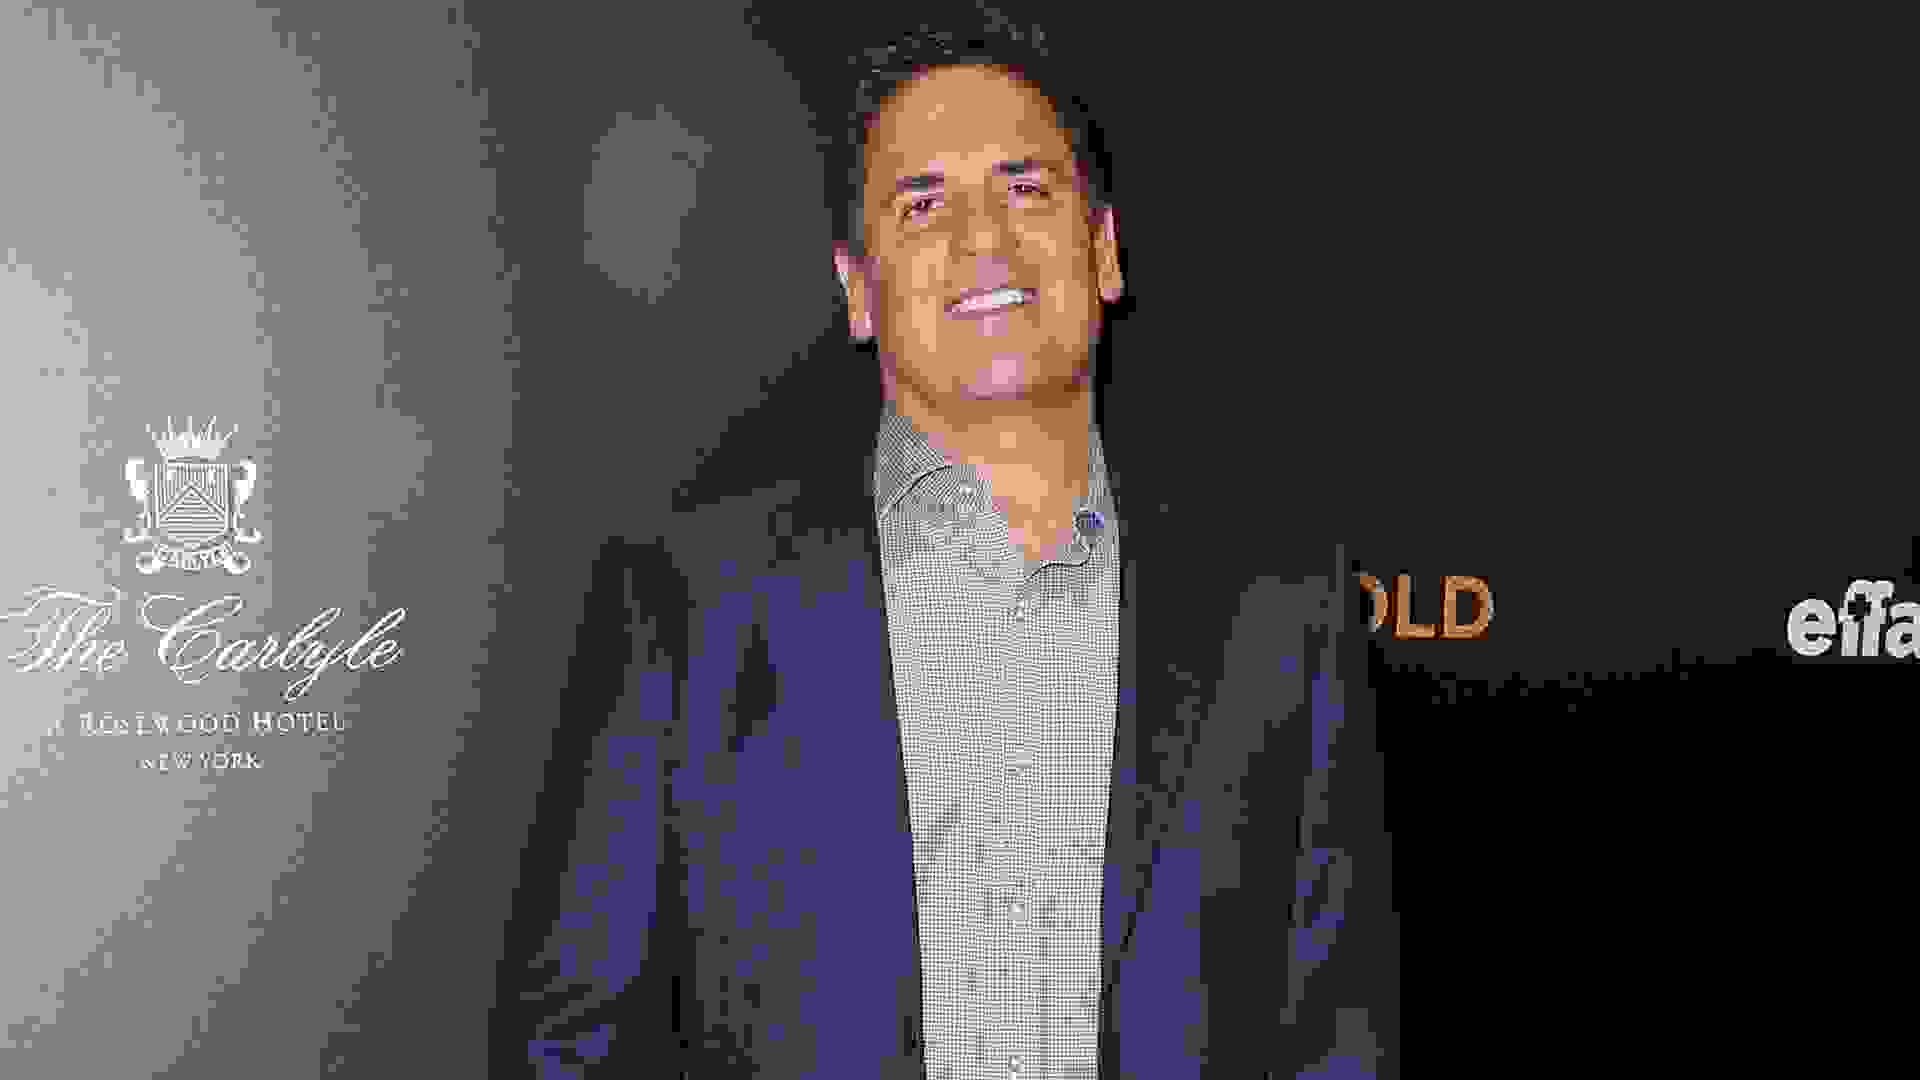 NEW YORK-MAR 30: TV personality Mark Cuban attends the "Woman In Gold" New York premiere, in conjunction with The Carlyle and ef+facto at the Museum of Modern Art on March 30, 2015 in New York City.